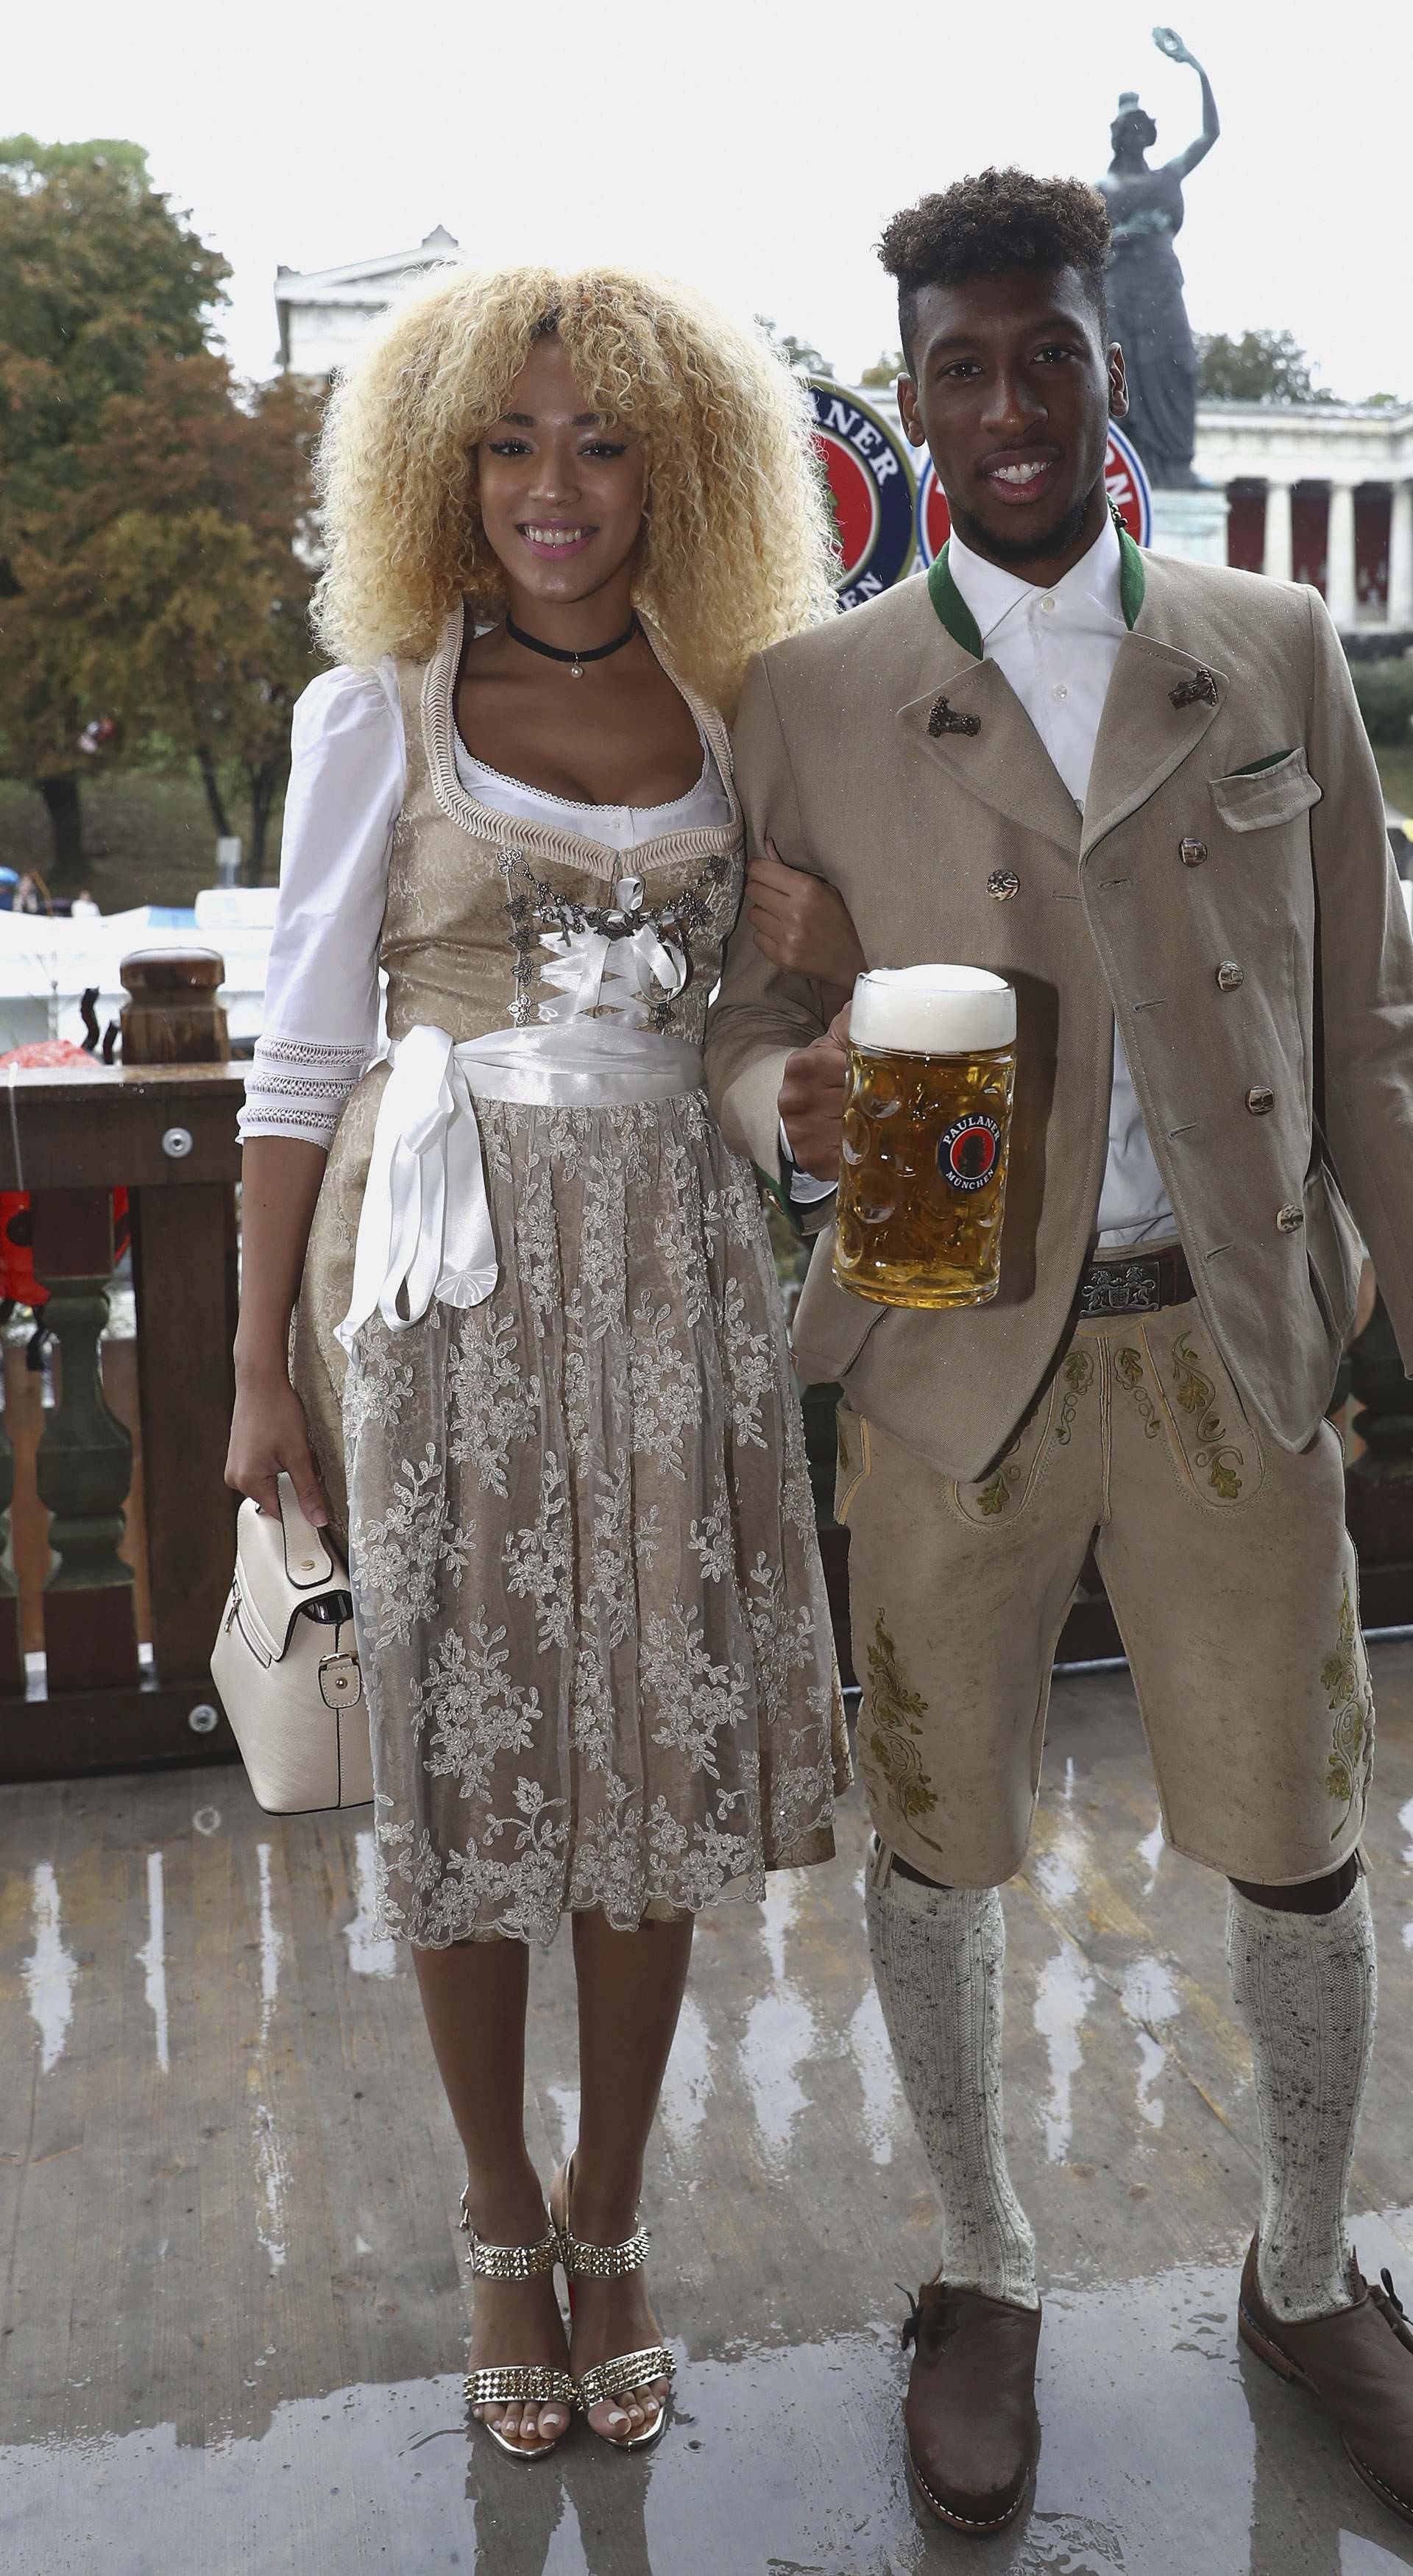 Coman of FC Bayern Munich and Sephora pose during their visit at the Oktoberfest in Munich